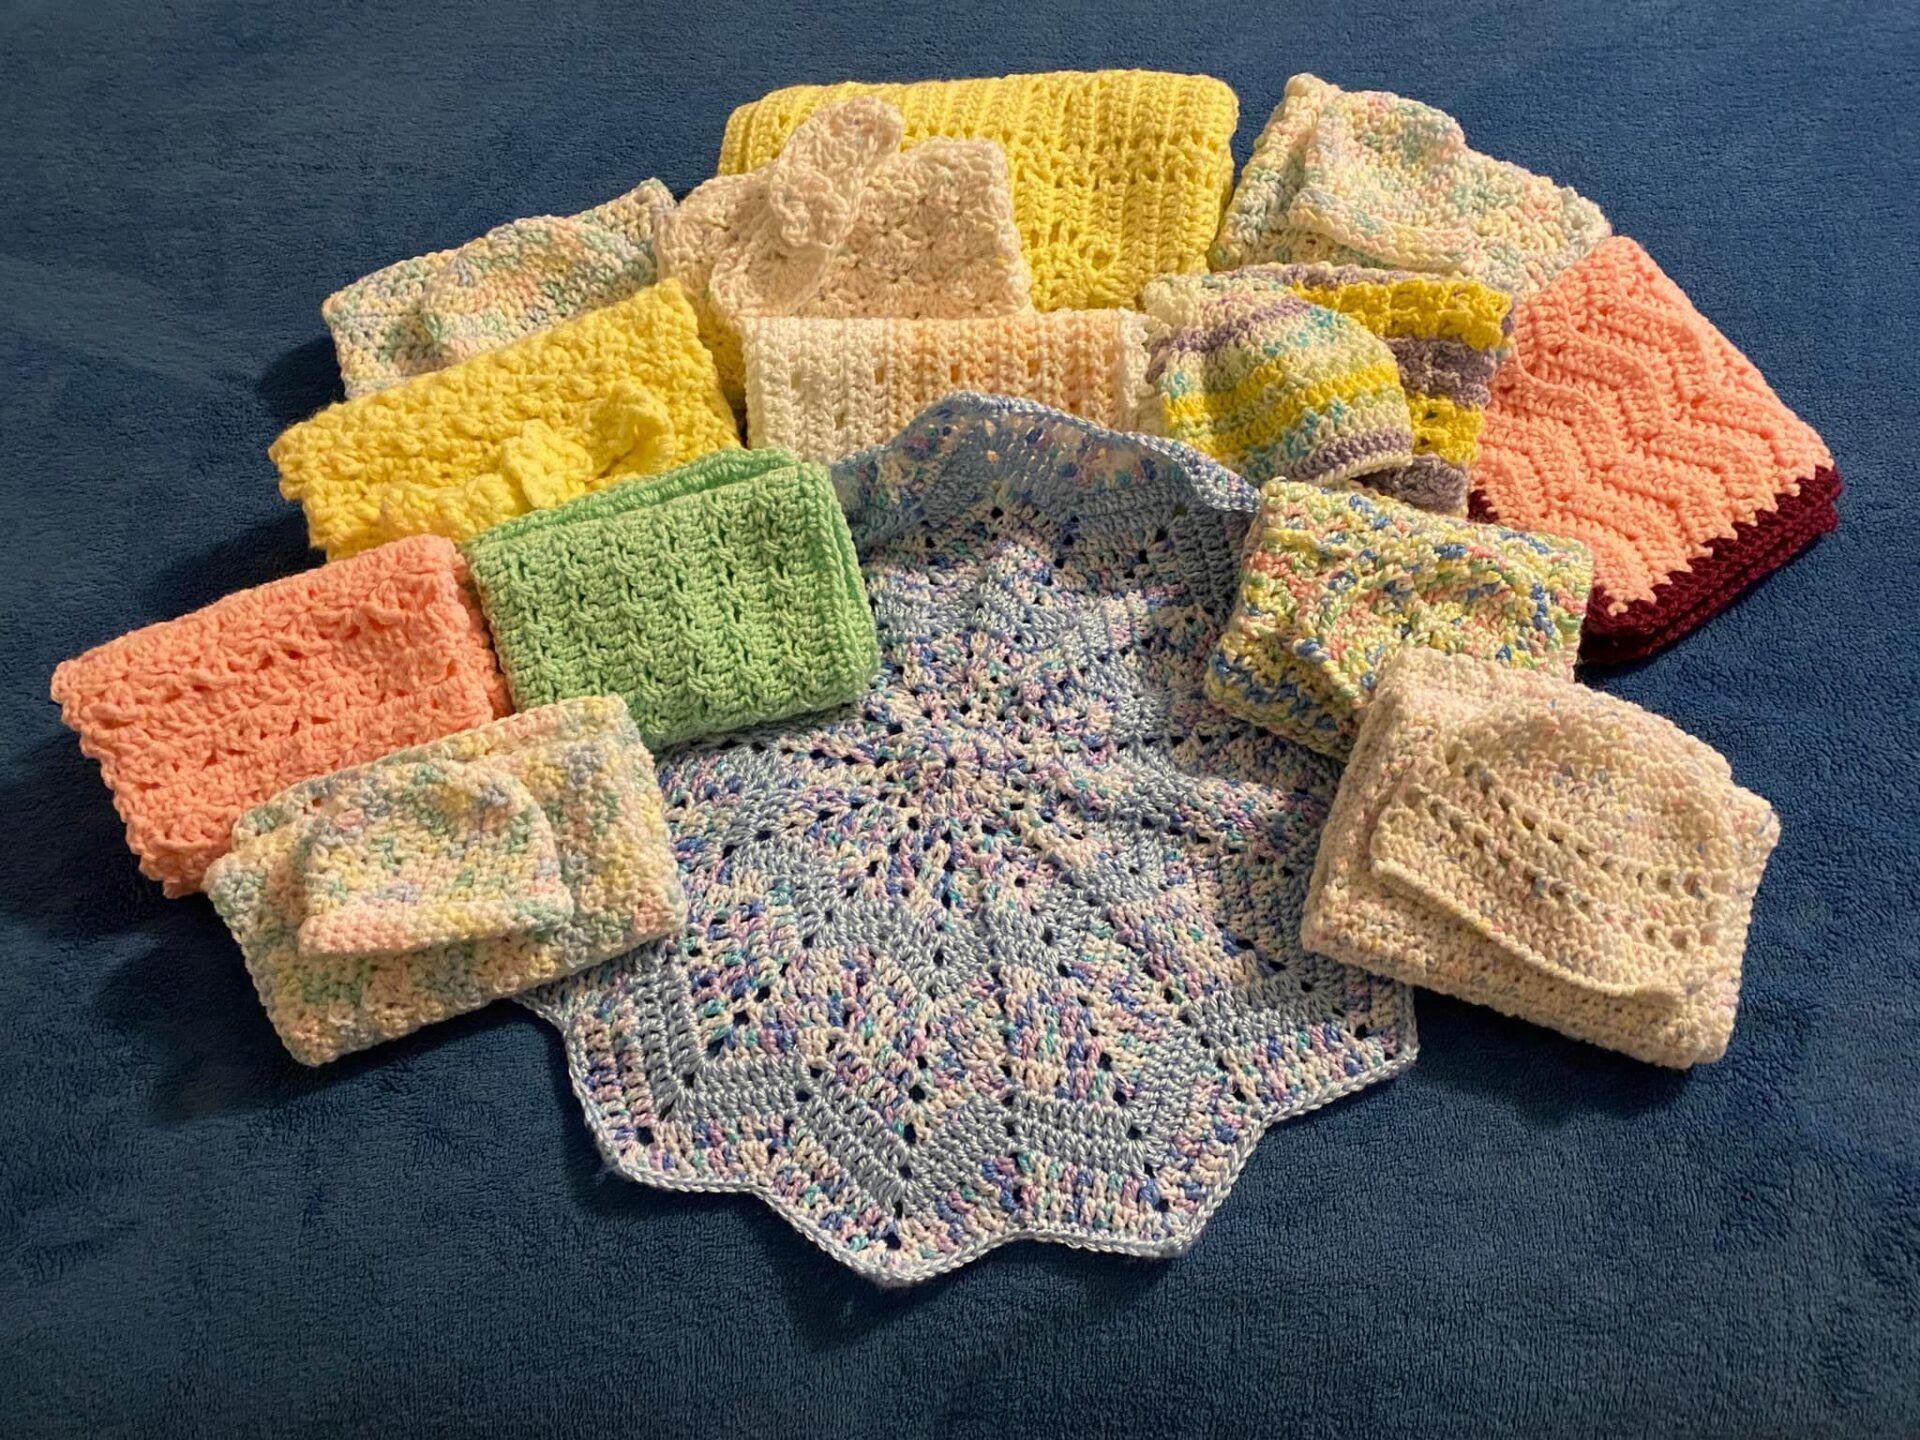 ALA Stitches of Love crochet group made 14 blankets and 8 hats to go to babies at Mercy Hospital in Baltimore.  Thanks to Terry Hamilton, Diane Lowe and Anna Grimes for making these with so much love.